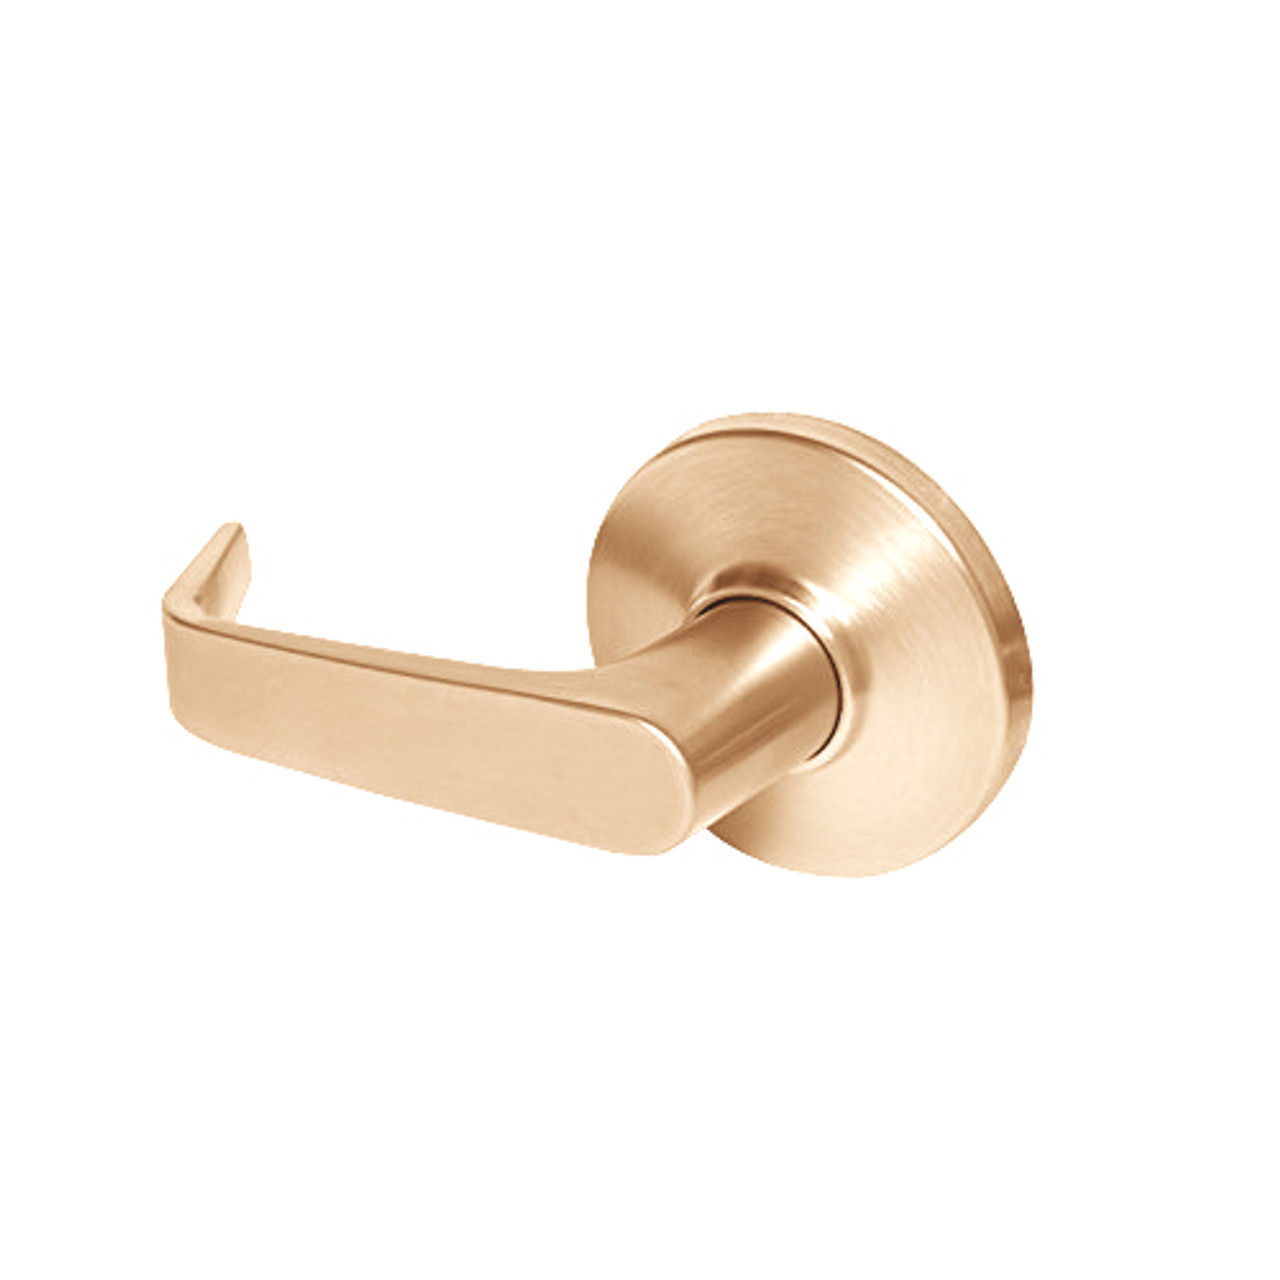 9K50N15DSTK611LM Best 9K Series Passage Heavy Duty Cylindrical Lever Locks with Contour Angle with Return Lever Design in Bright Bronze